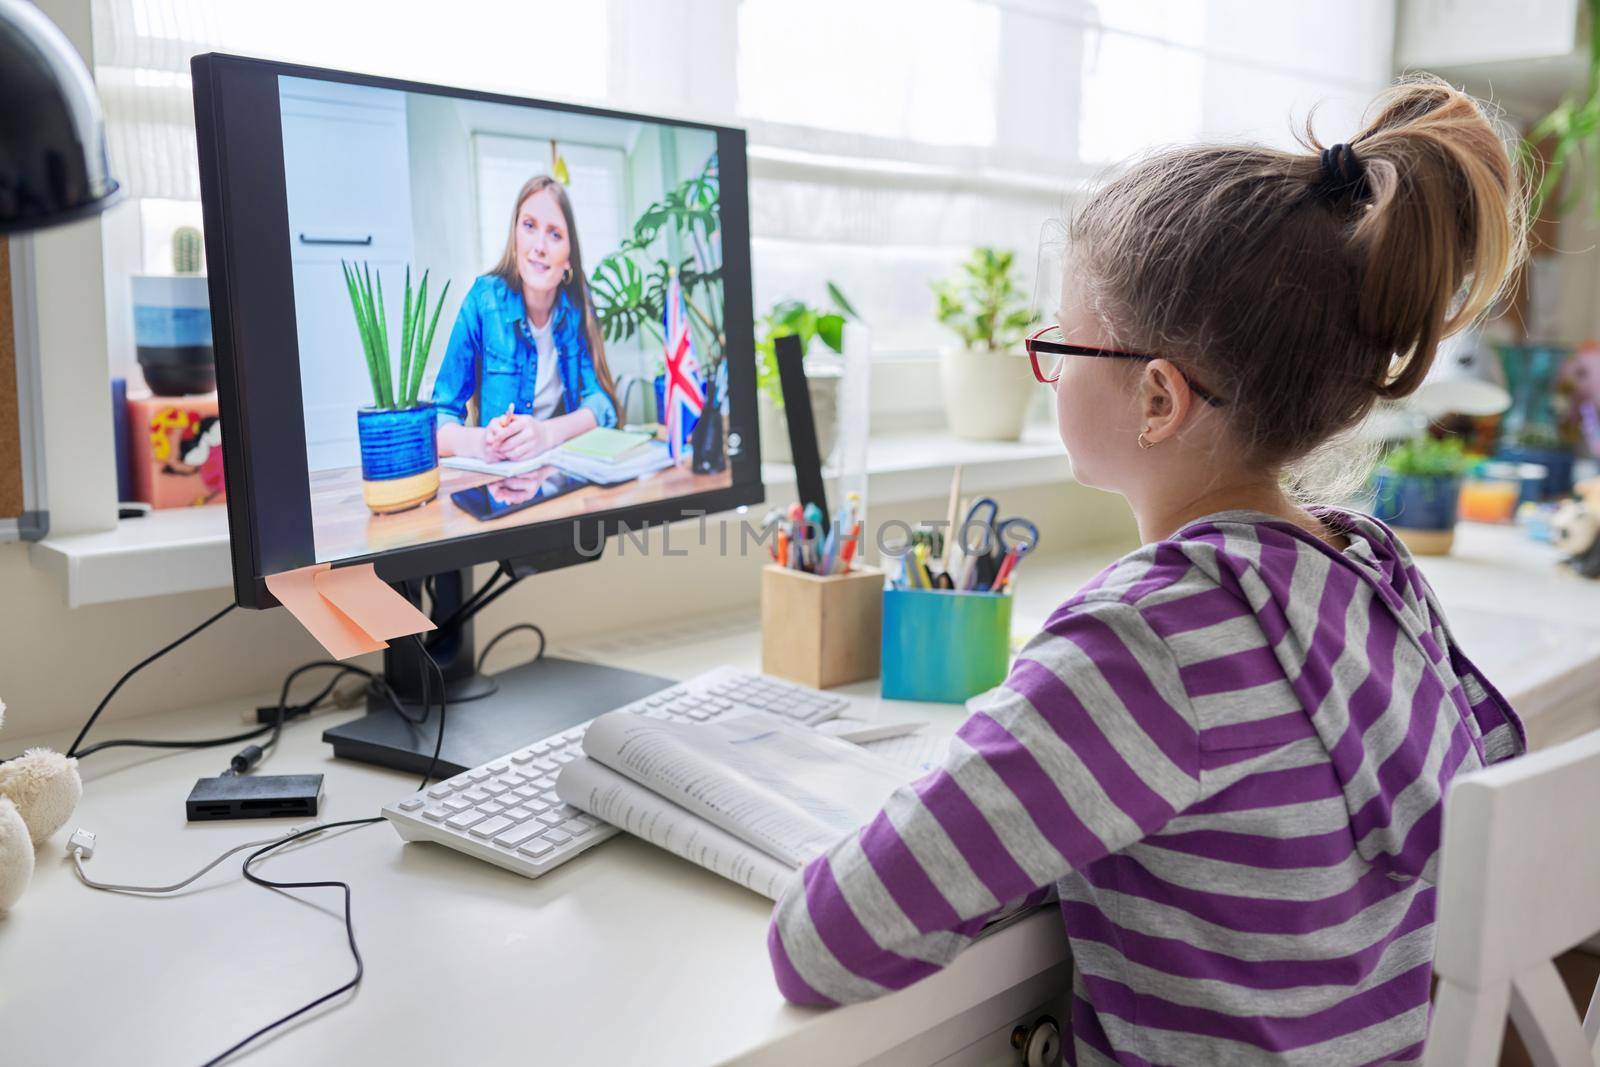 Online learning, children, little student girl learning language remotely with an English teacher. E-education, modern technologies in education, school concept